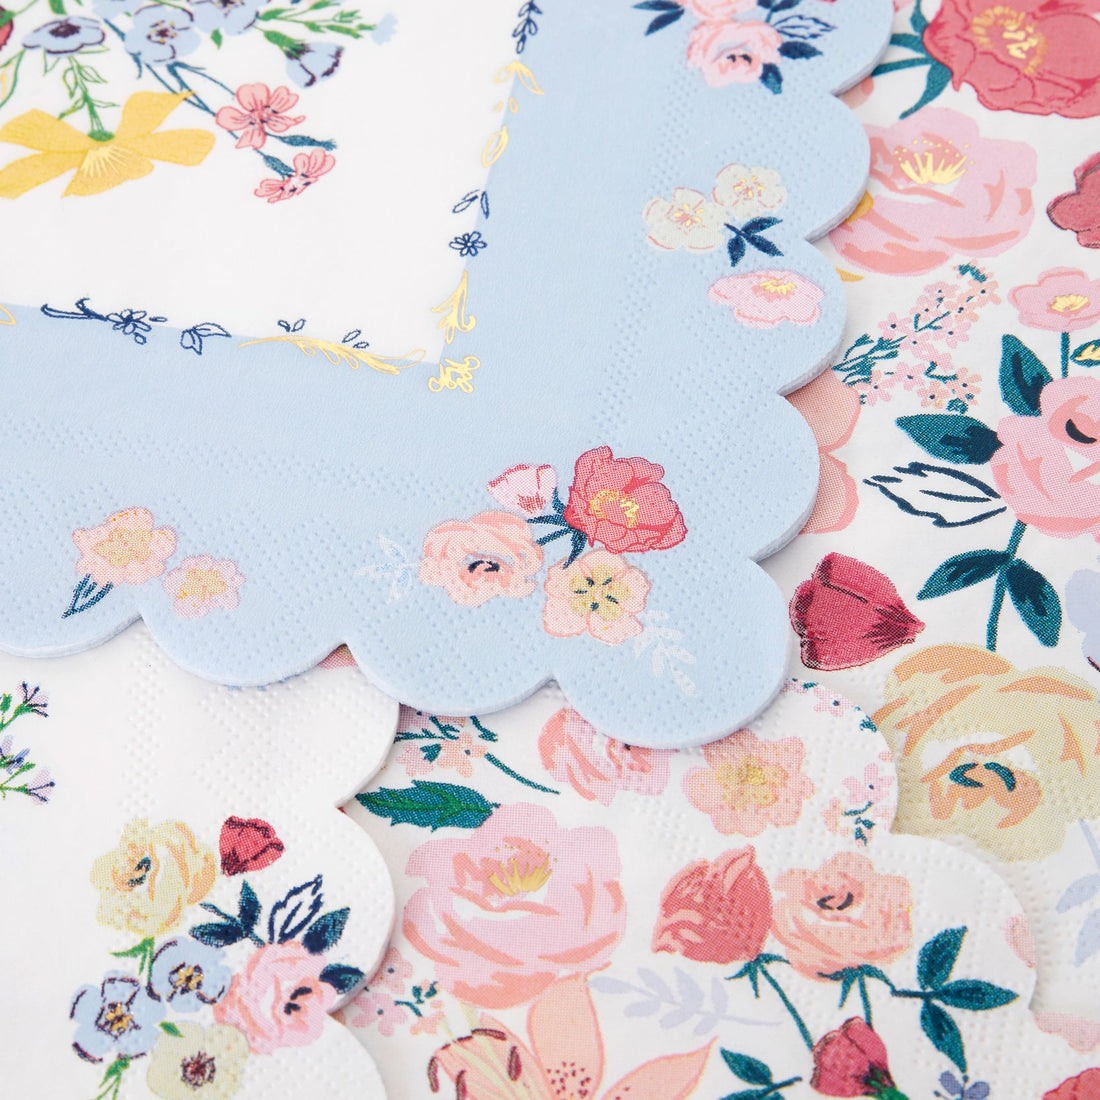 A set of Meri Meri English Garden Napkins with floral designs, perfect for a party table.